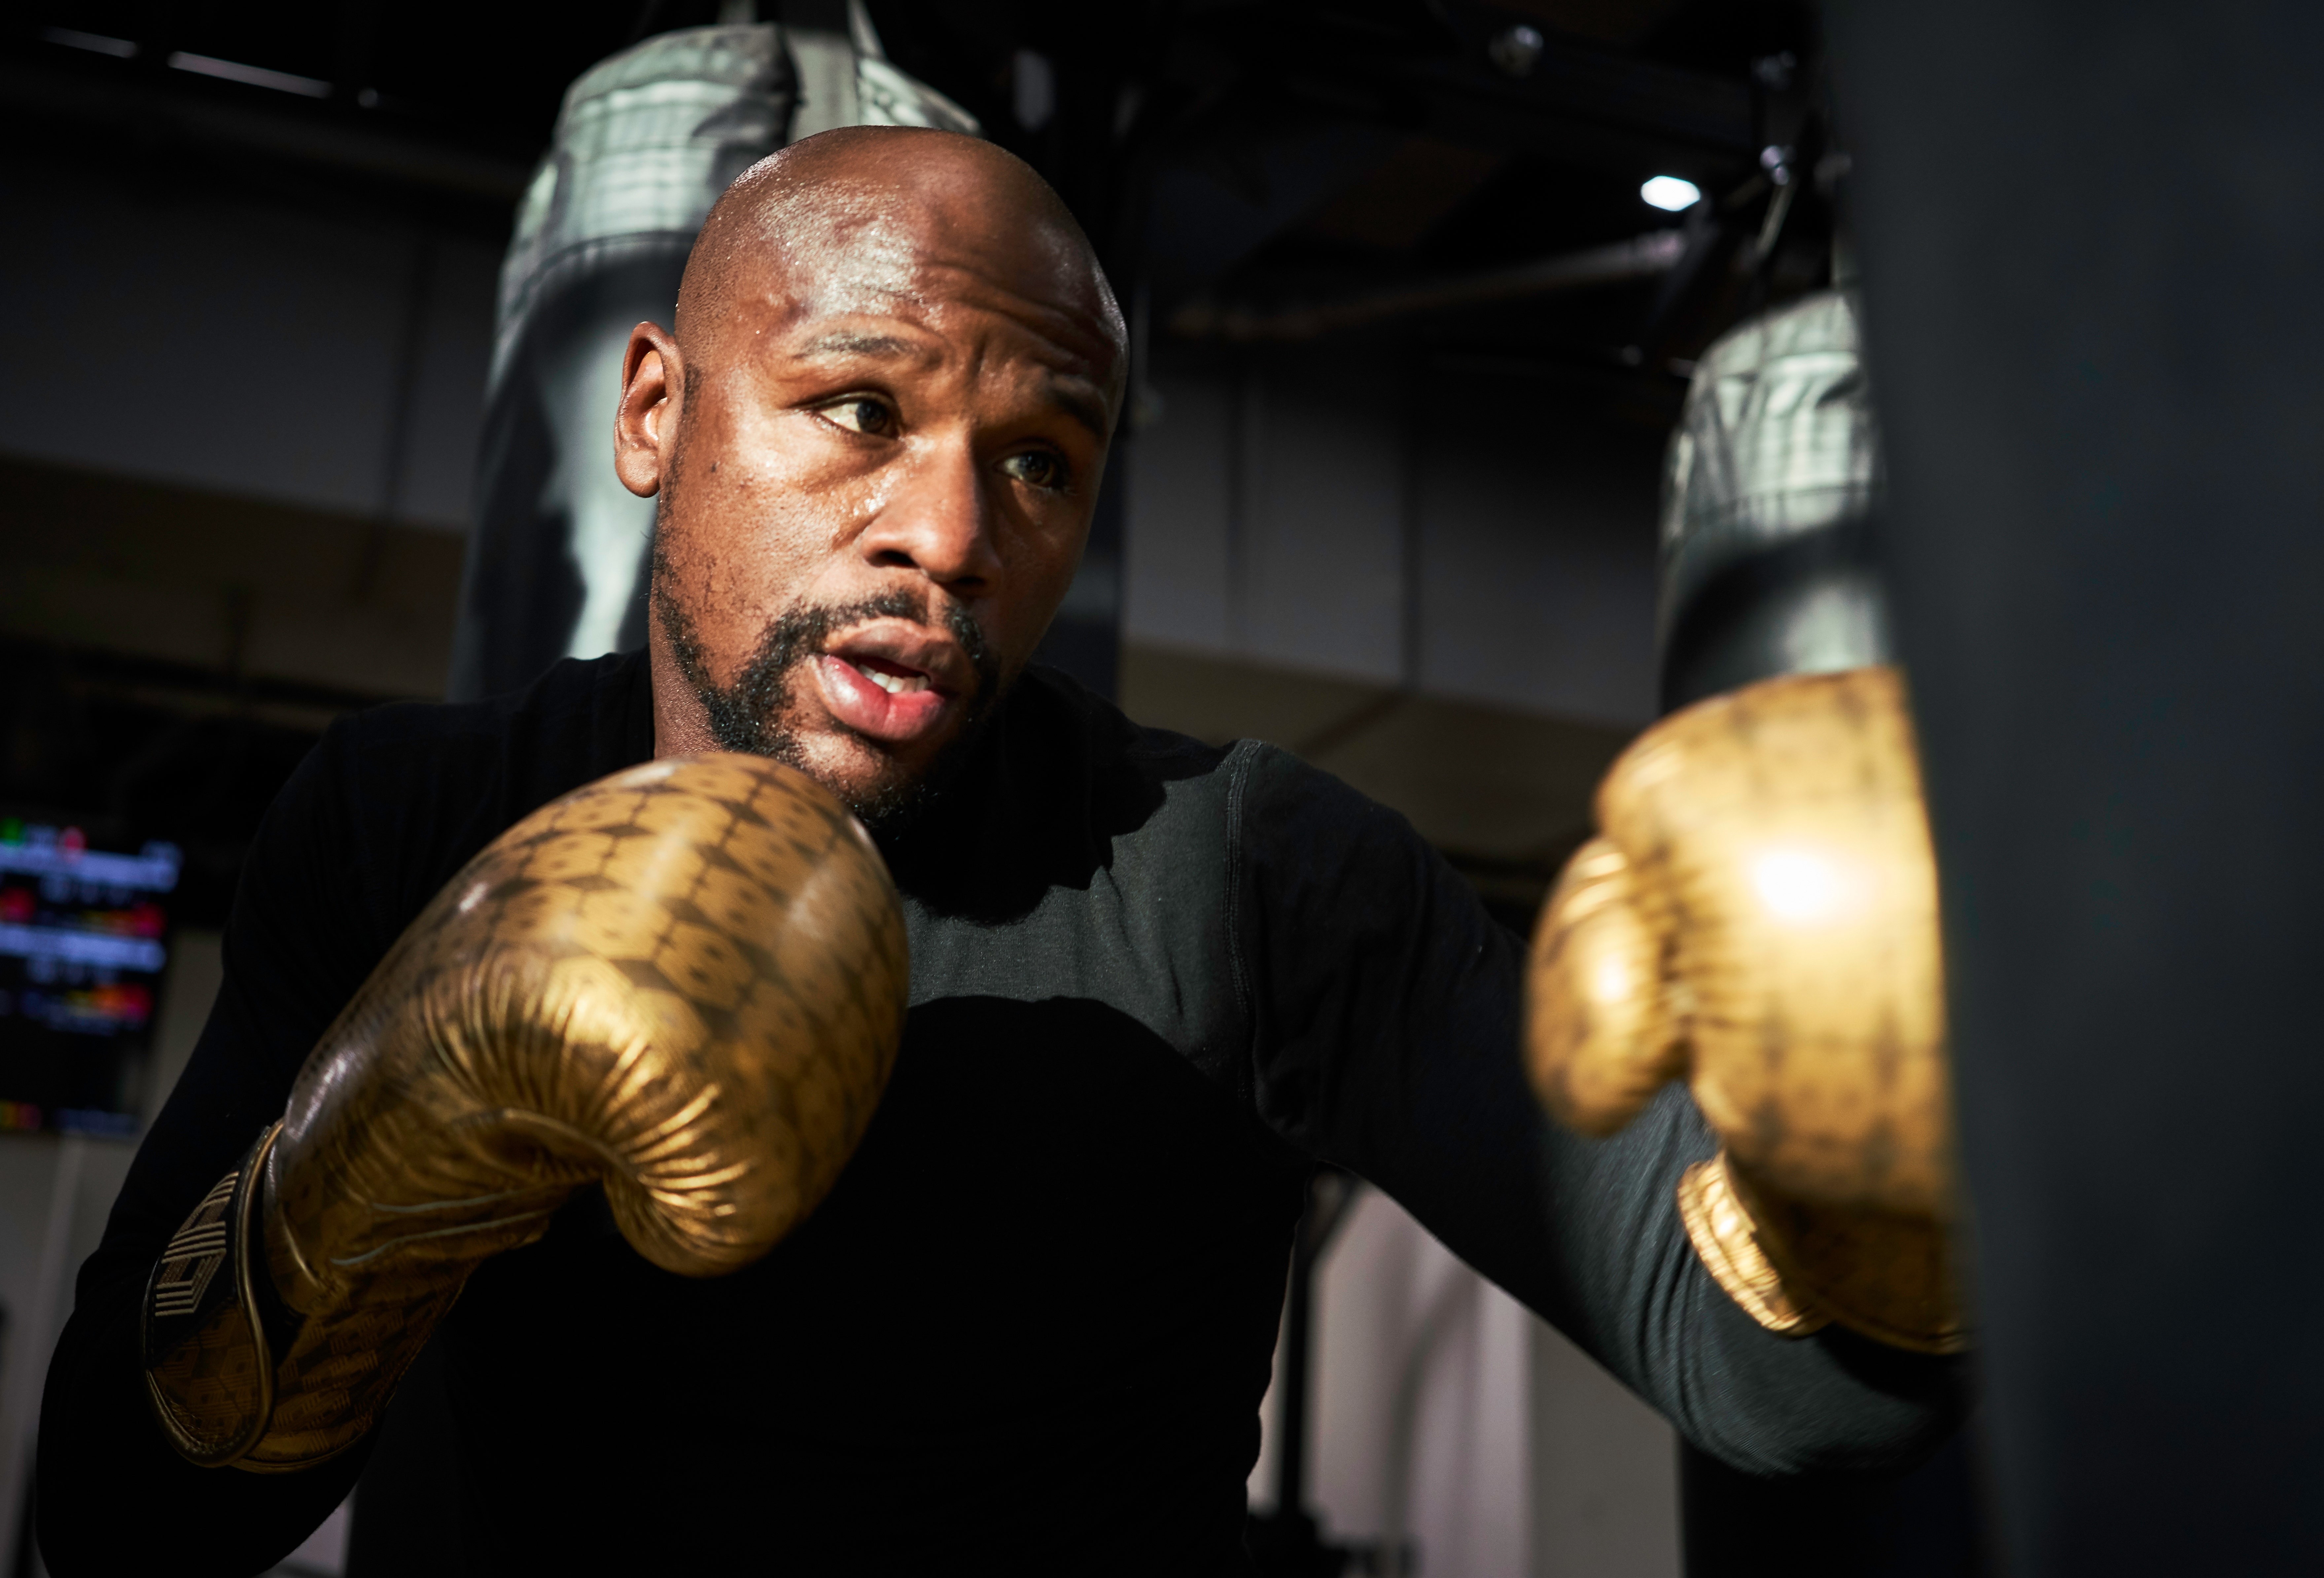 Mayweather Boxing + Fitness CEO On New Locations, Virtual Reality Product: 'It's More Than Just A Workout'